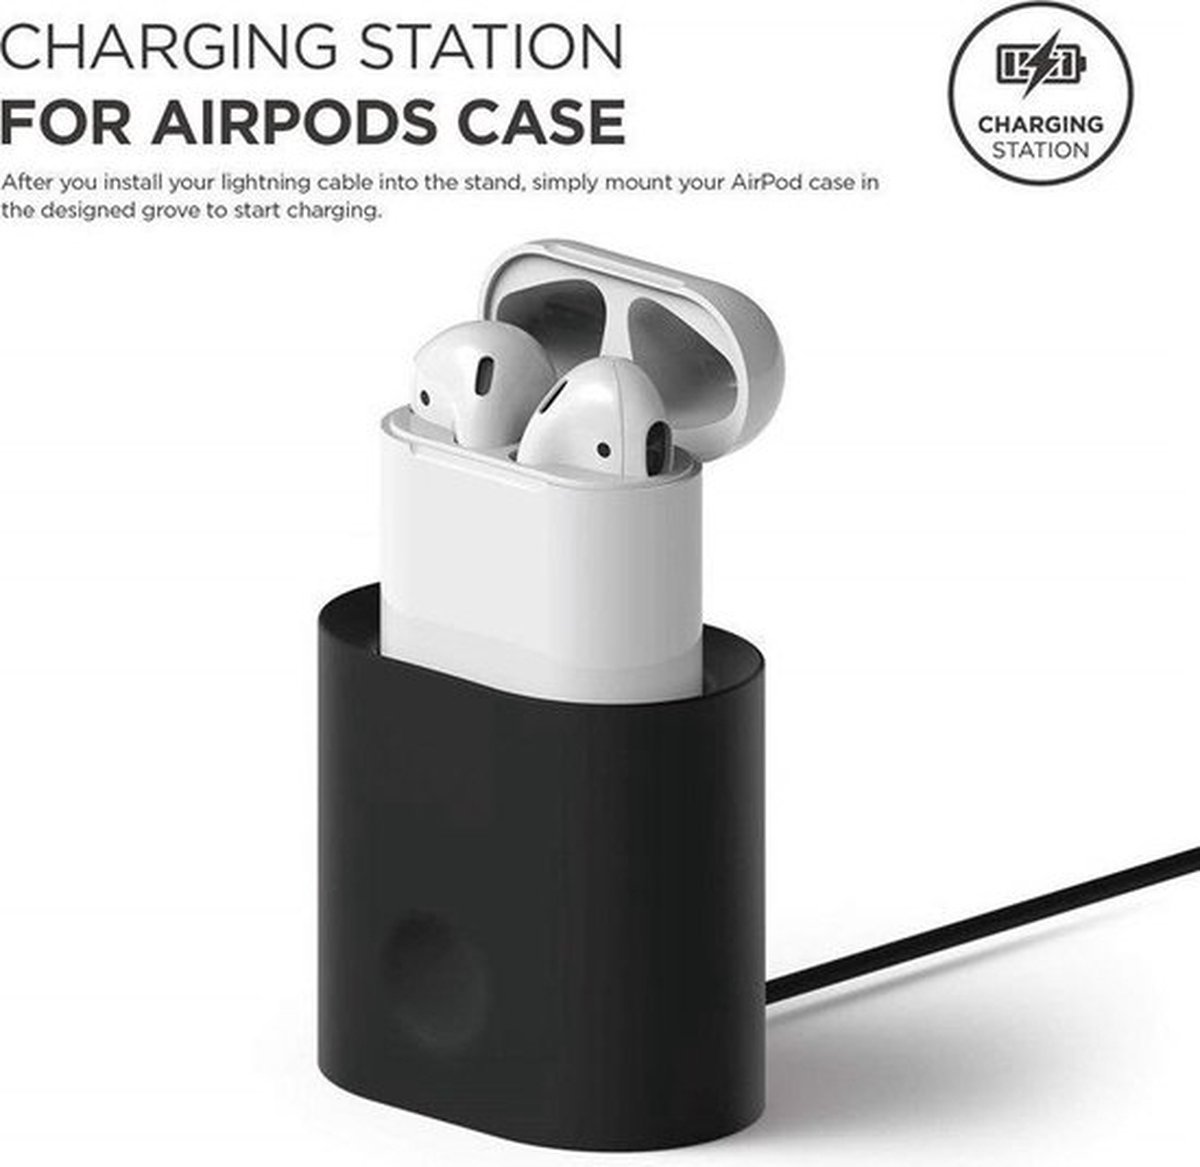 Airpods charging station